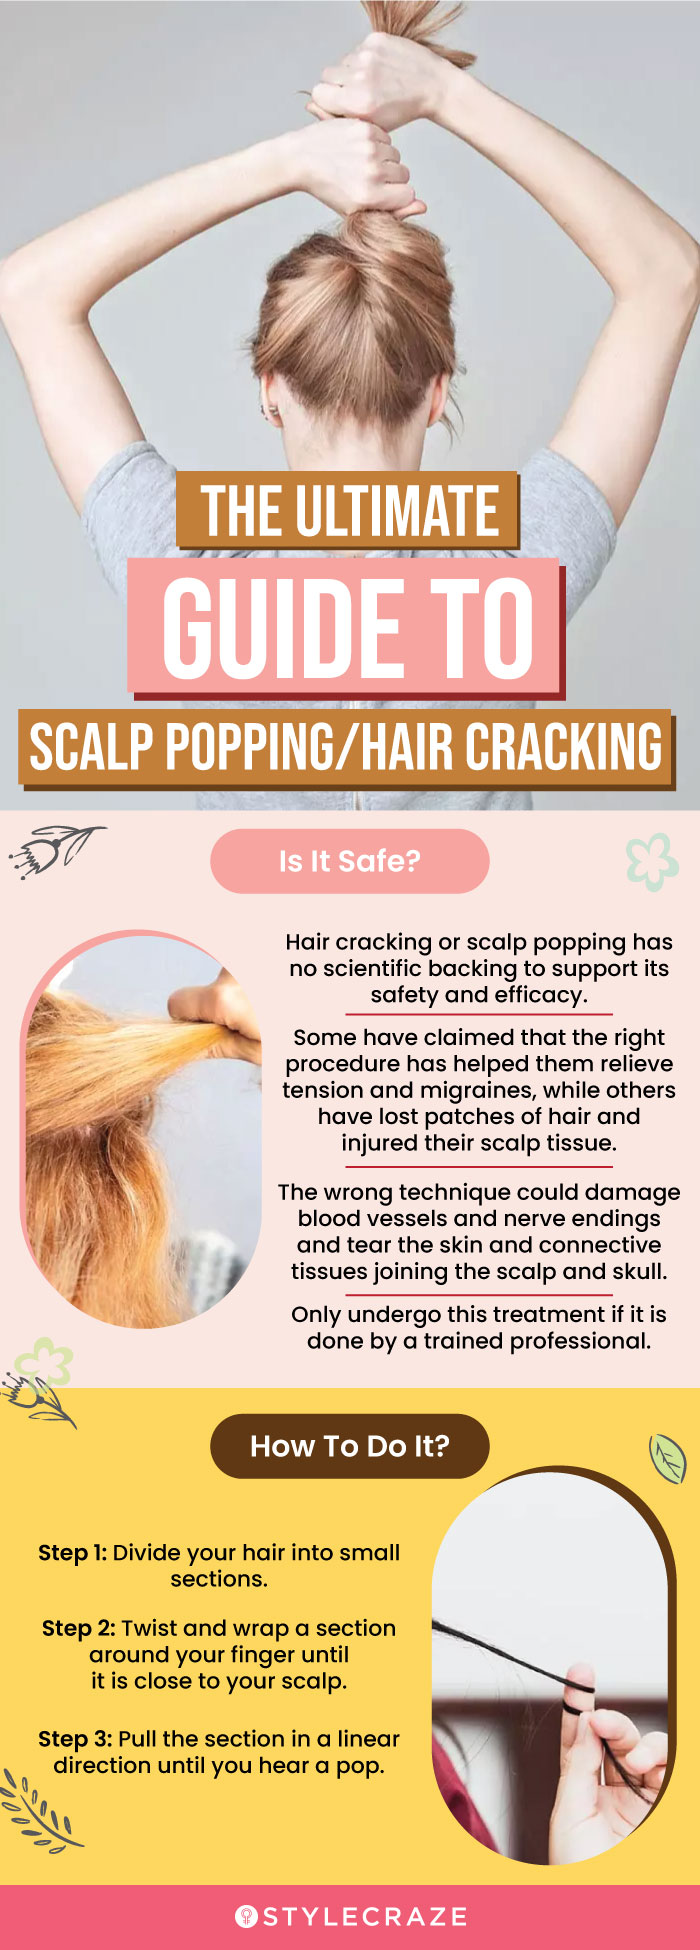 the ultimate guide to scalp popping hair cracking (infographic)